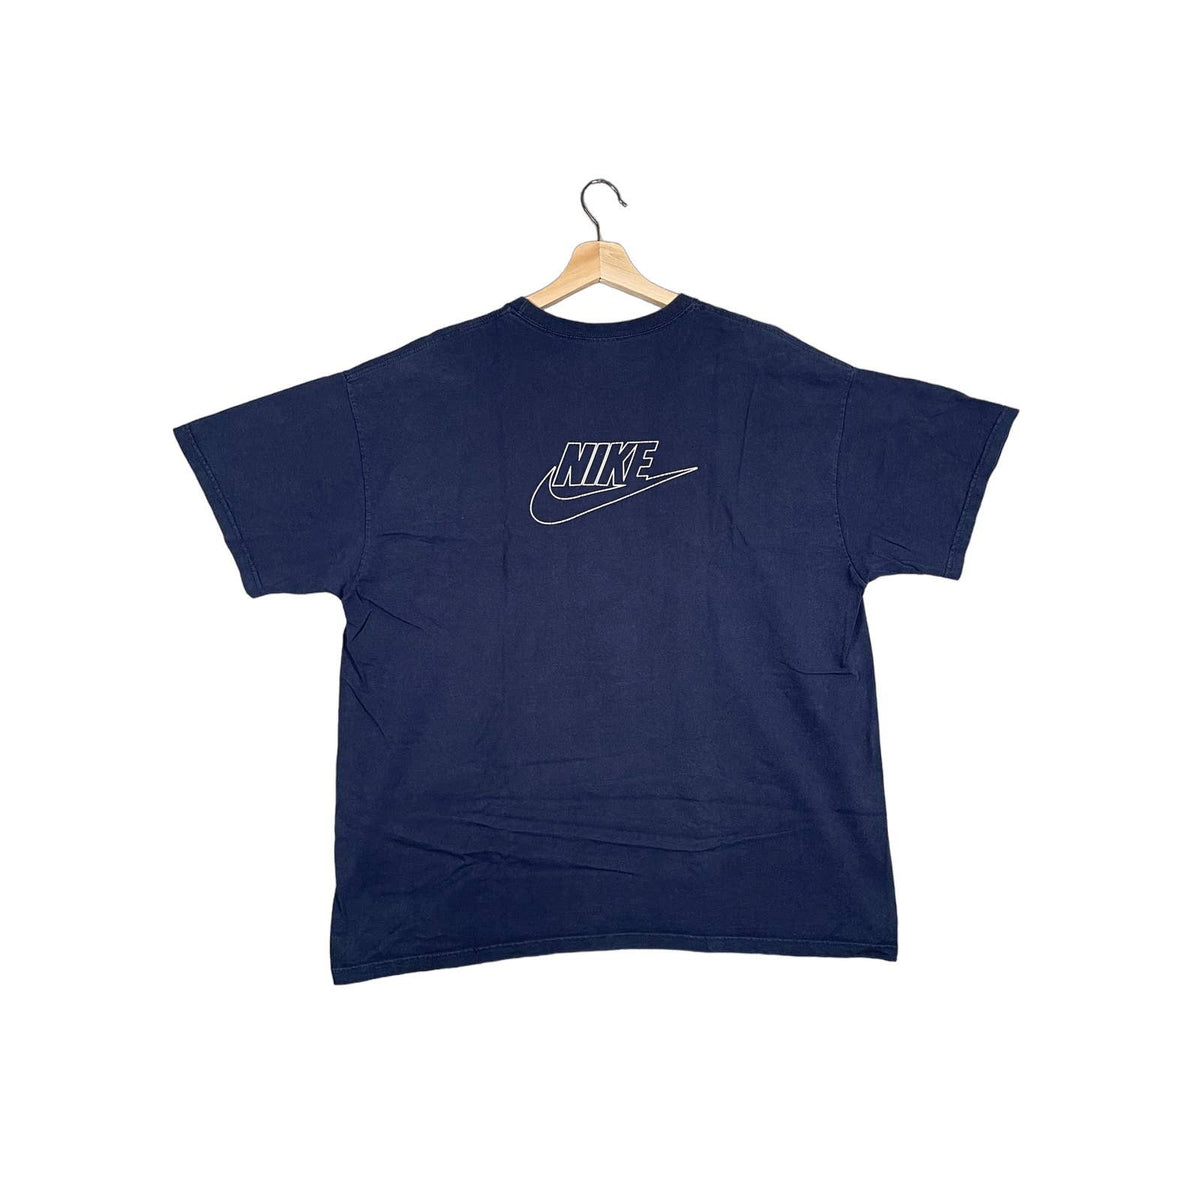 Vintage 2000's Nike "Just Do It" T-Shirt